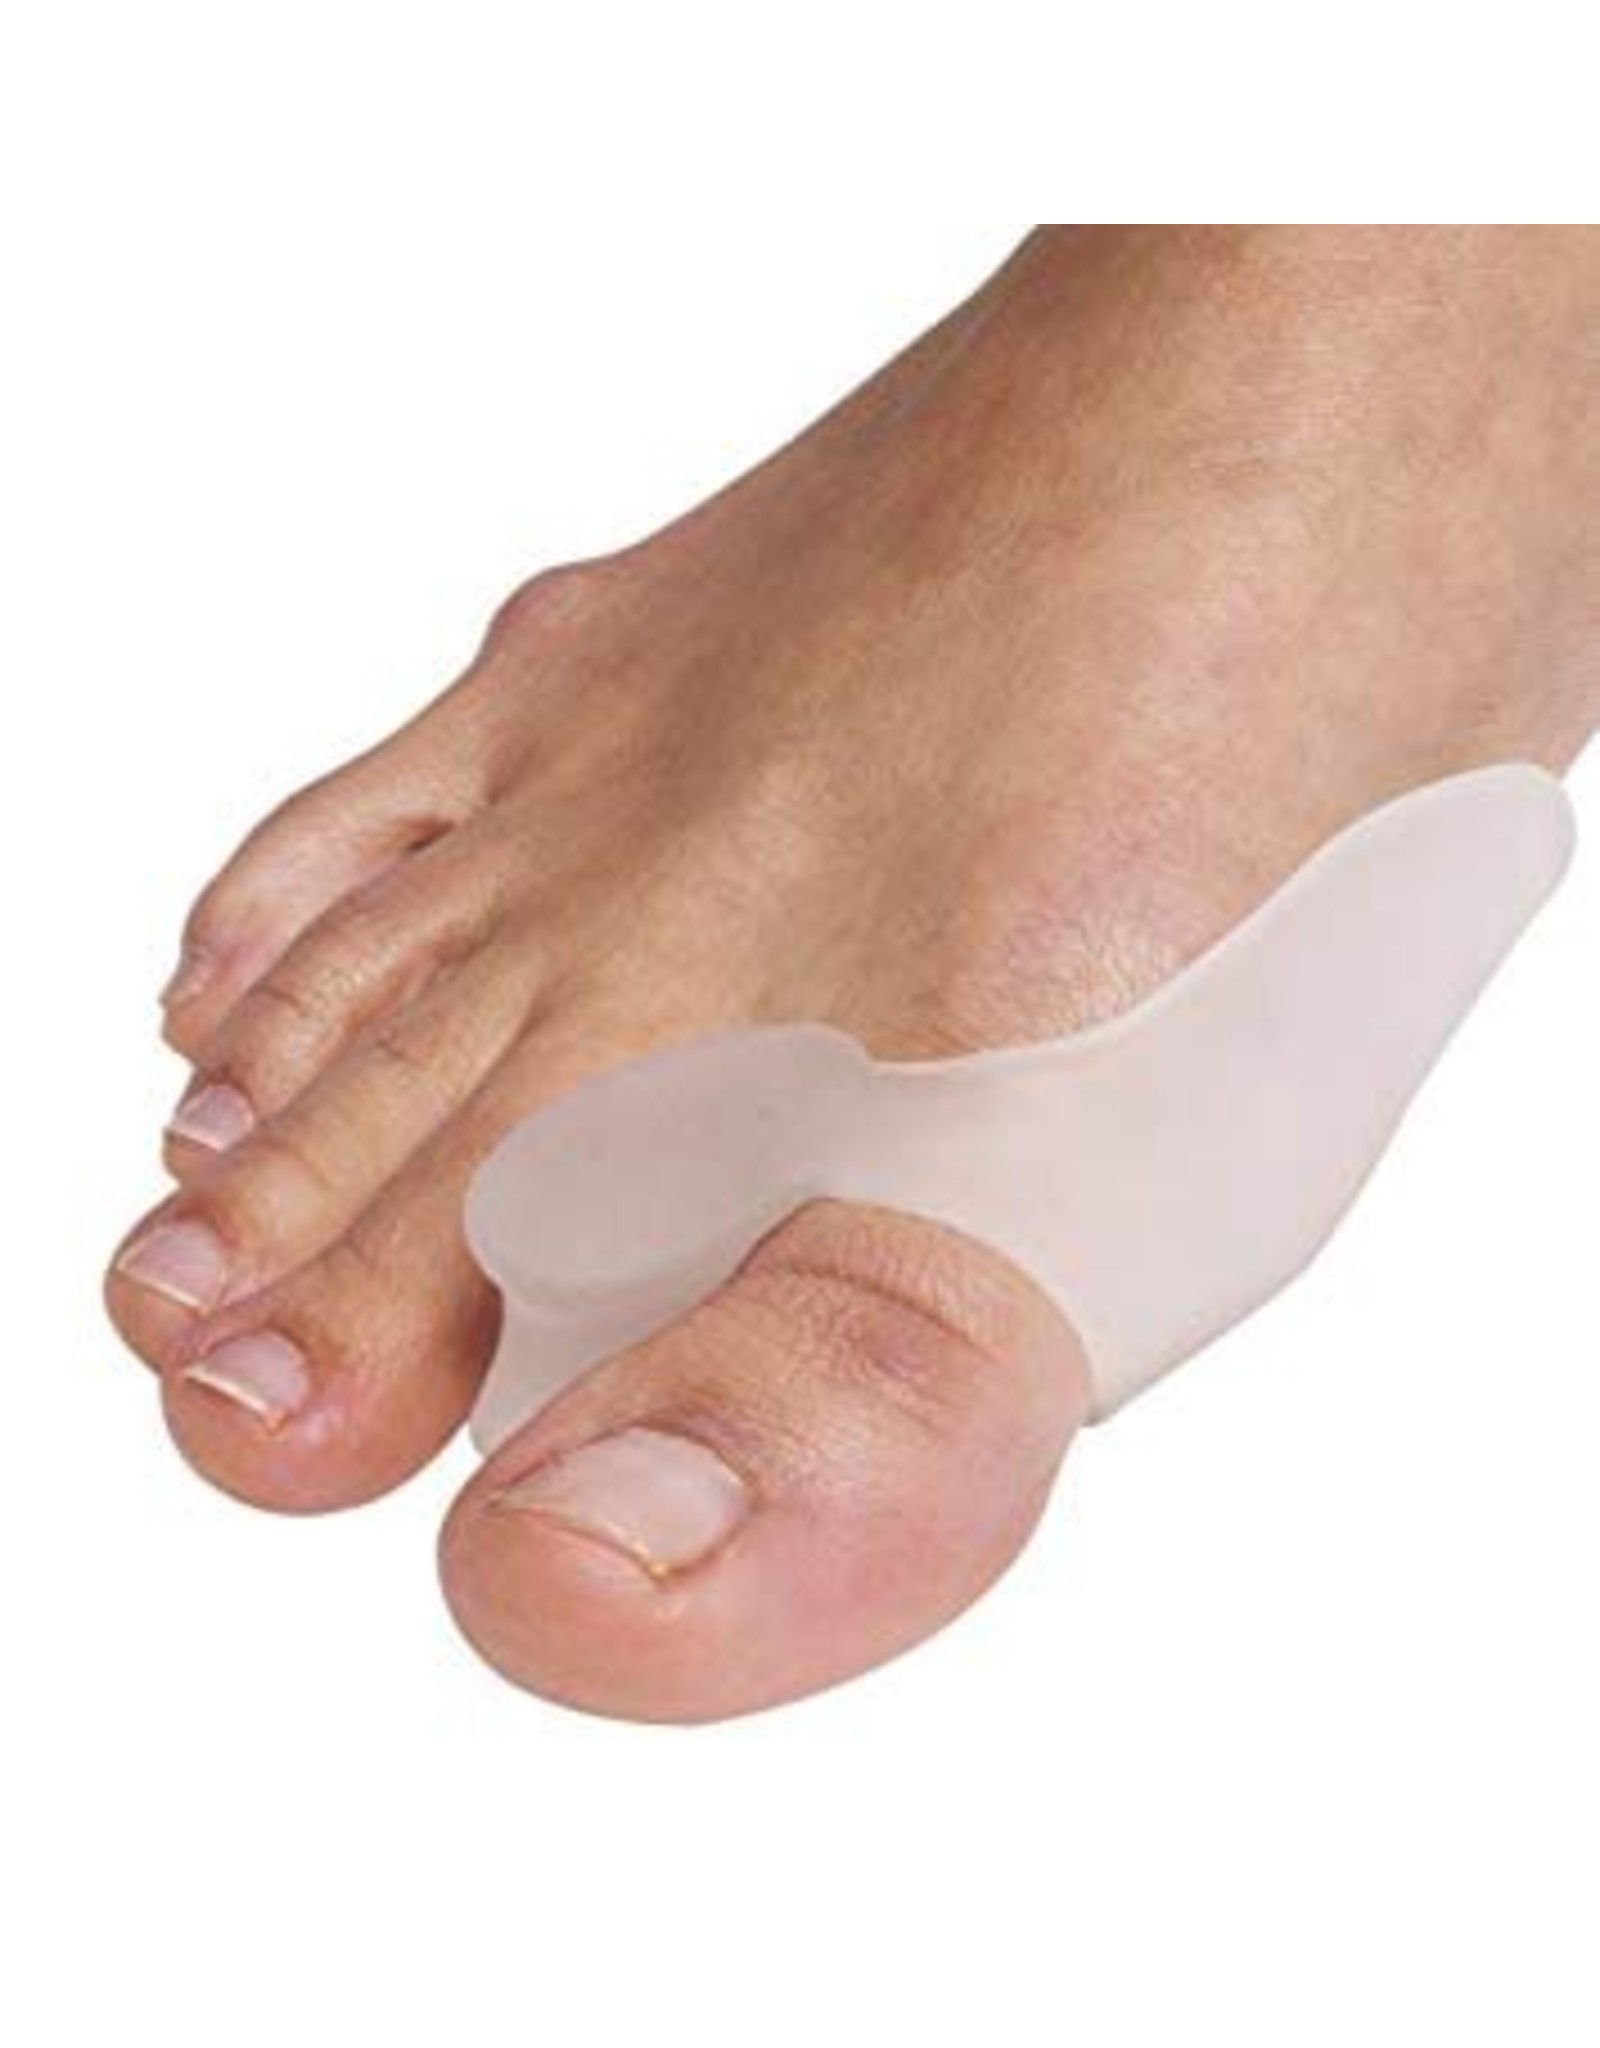 OrthoConnection Gel Toe Spreaders with bunions